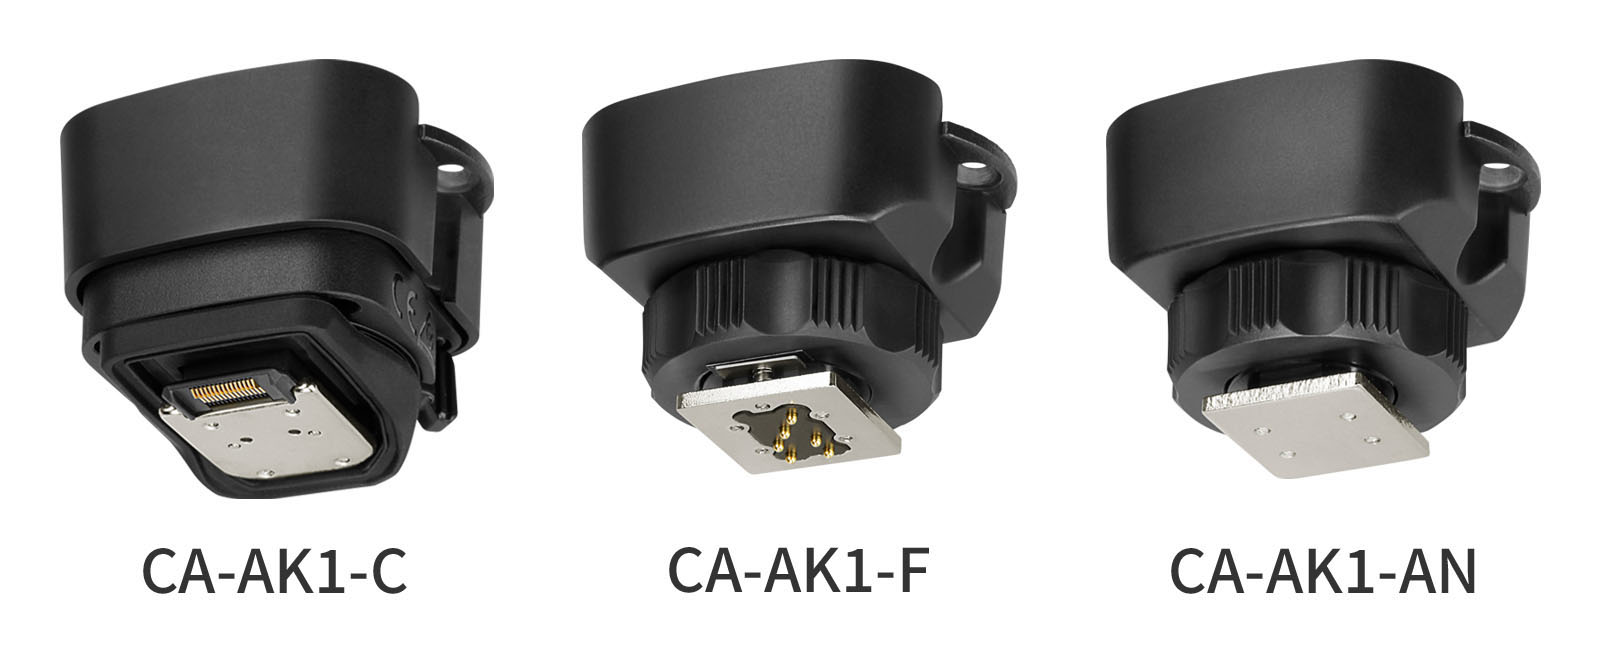 TASCAM Announces the CA-AK1 Conversion Adapters for the CA-XLR2d Series